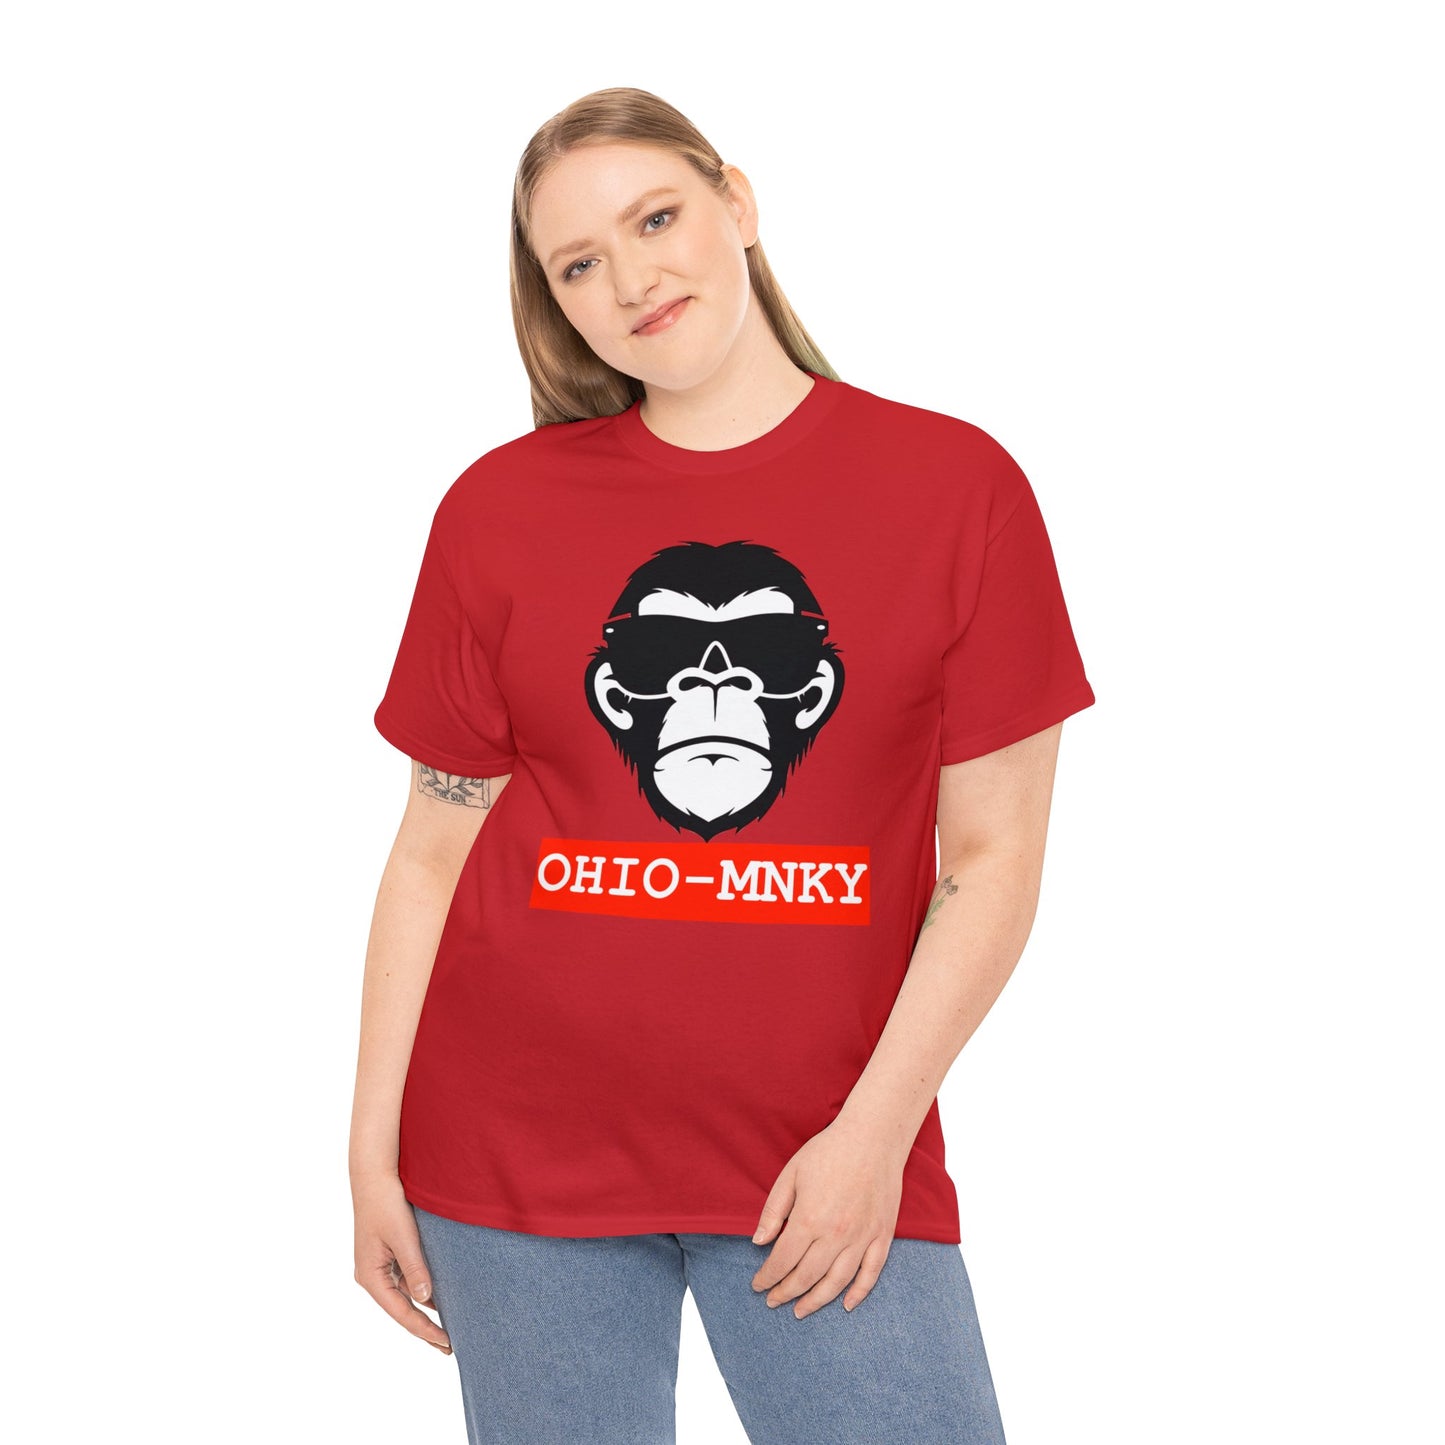 OHIO-MNKY: OFFICIAL STAMP (Limited Edition) / Unisex Heavy Cotton Tee